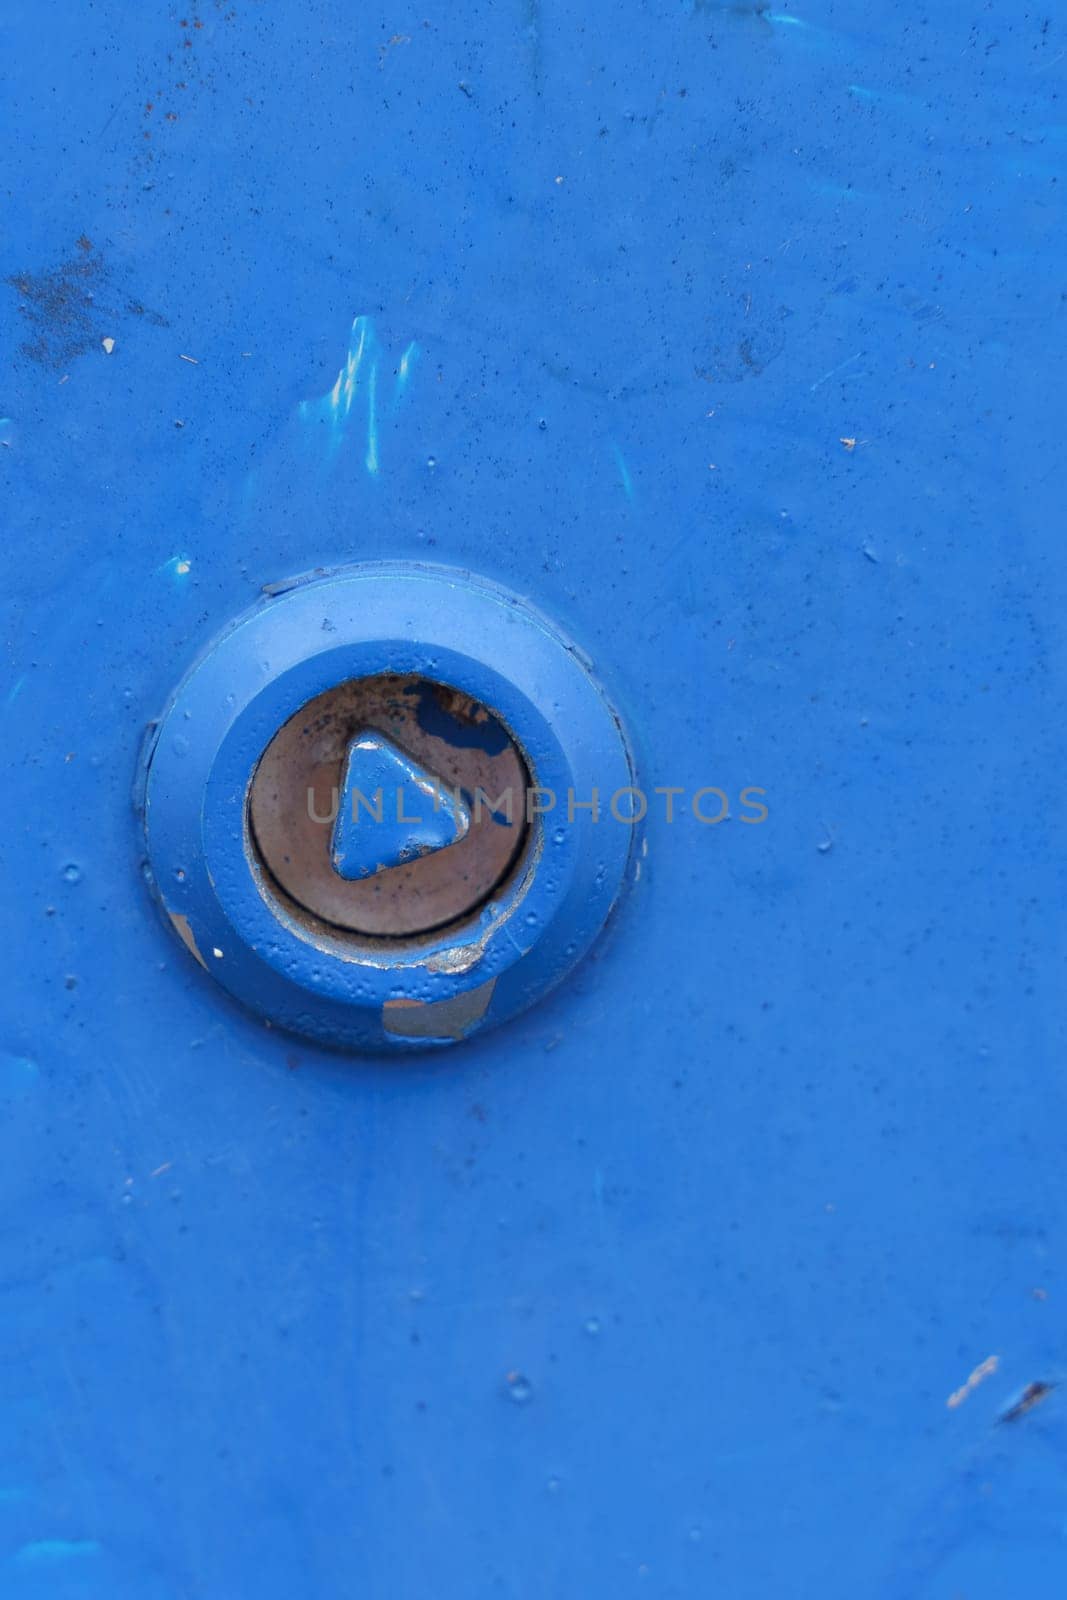 Close-up of Rusty Bolt on Blue Metal Surface by Sd28DimoN_1976